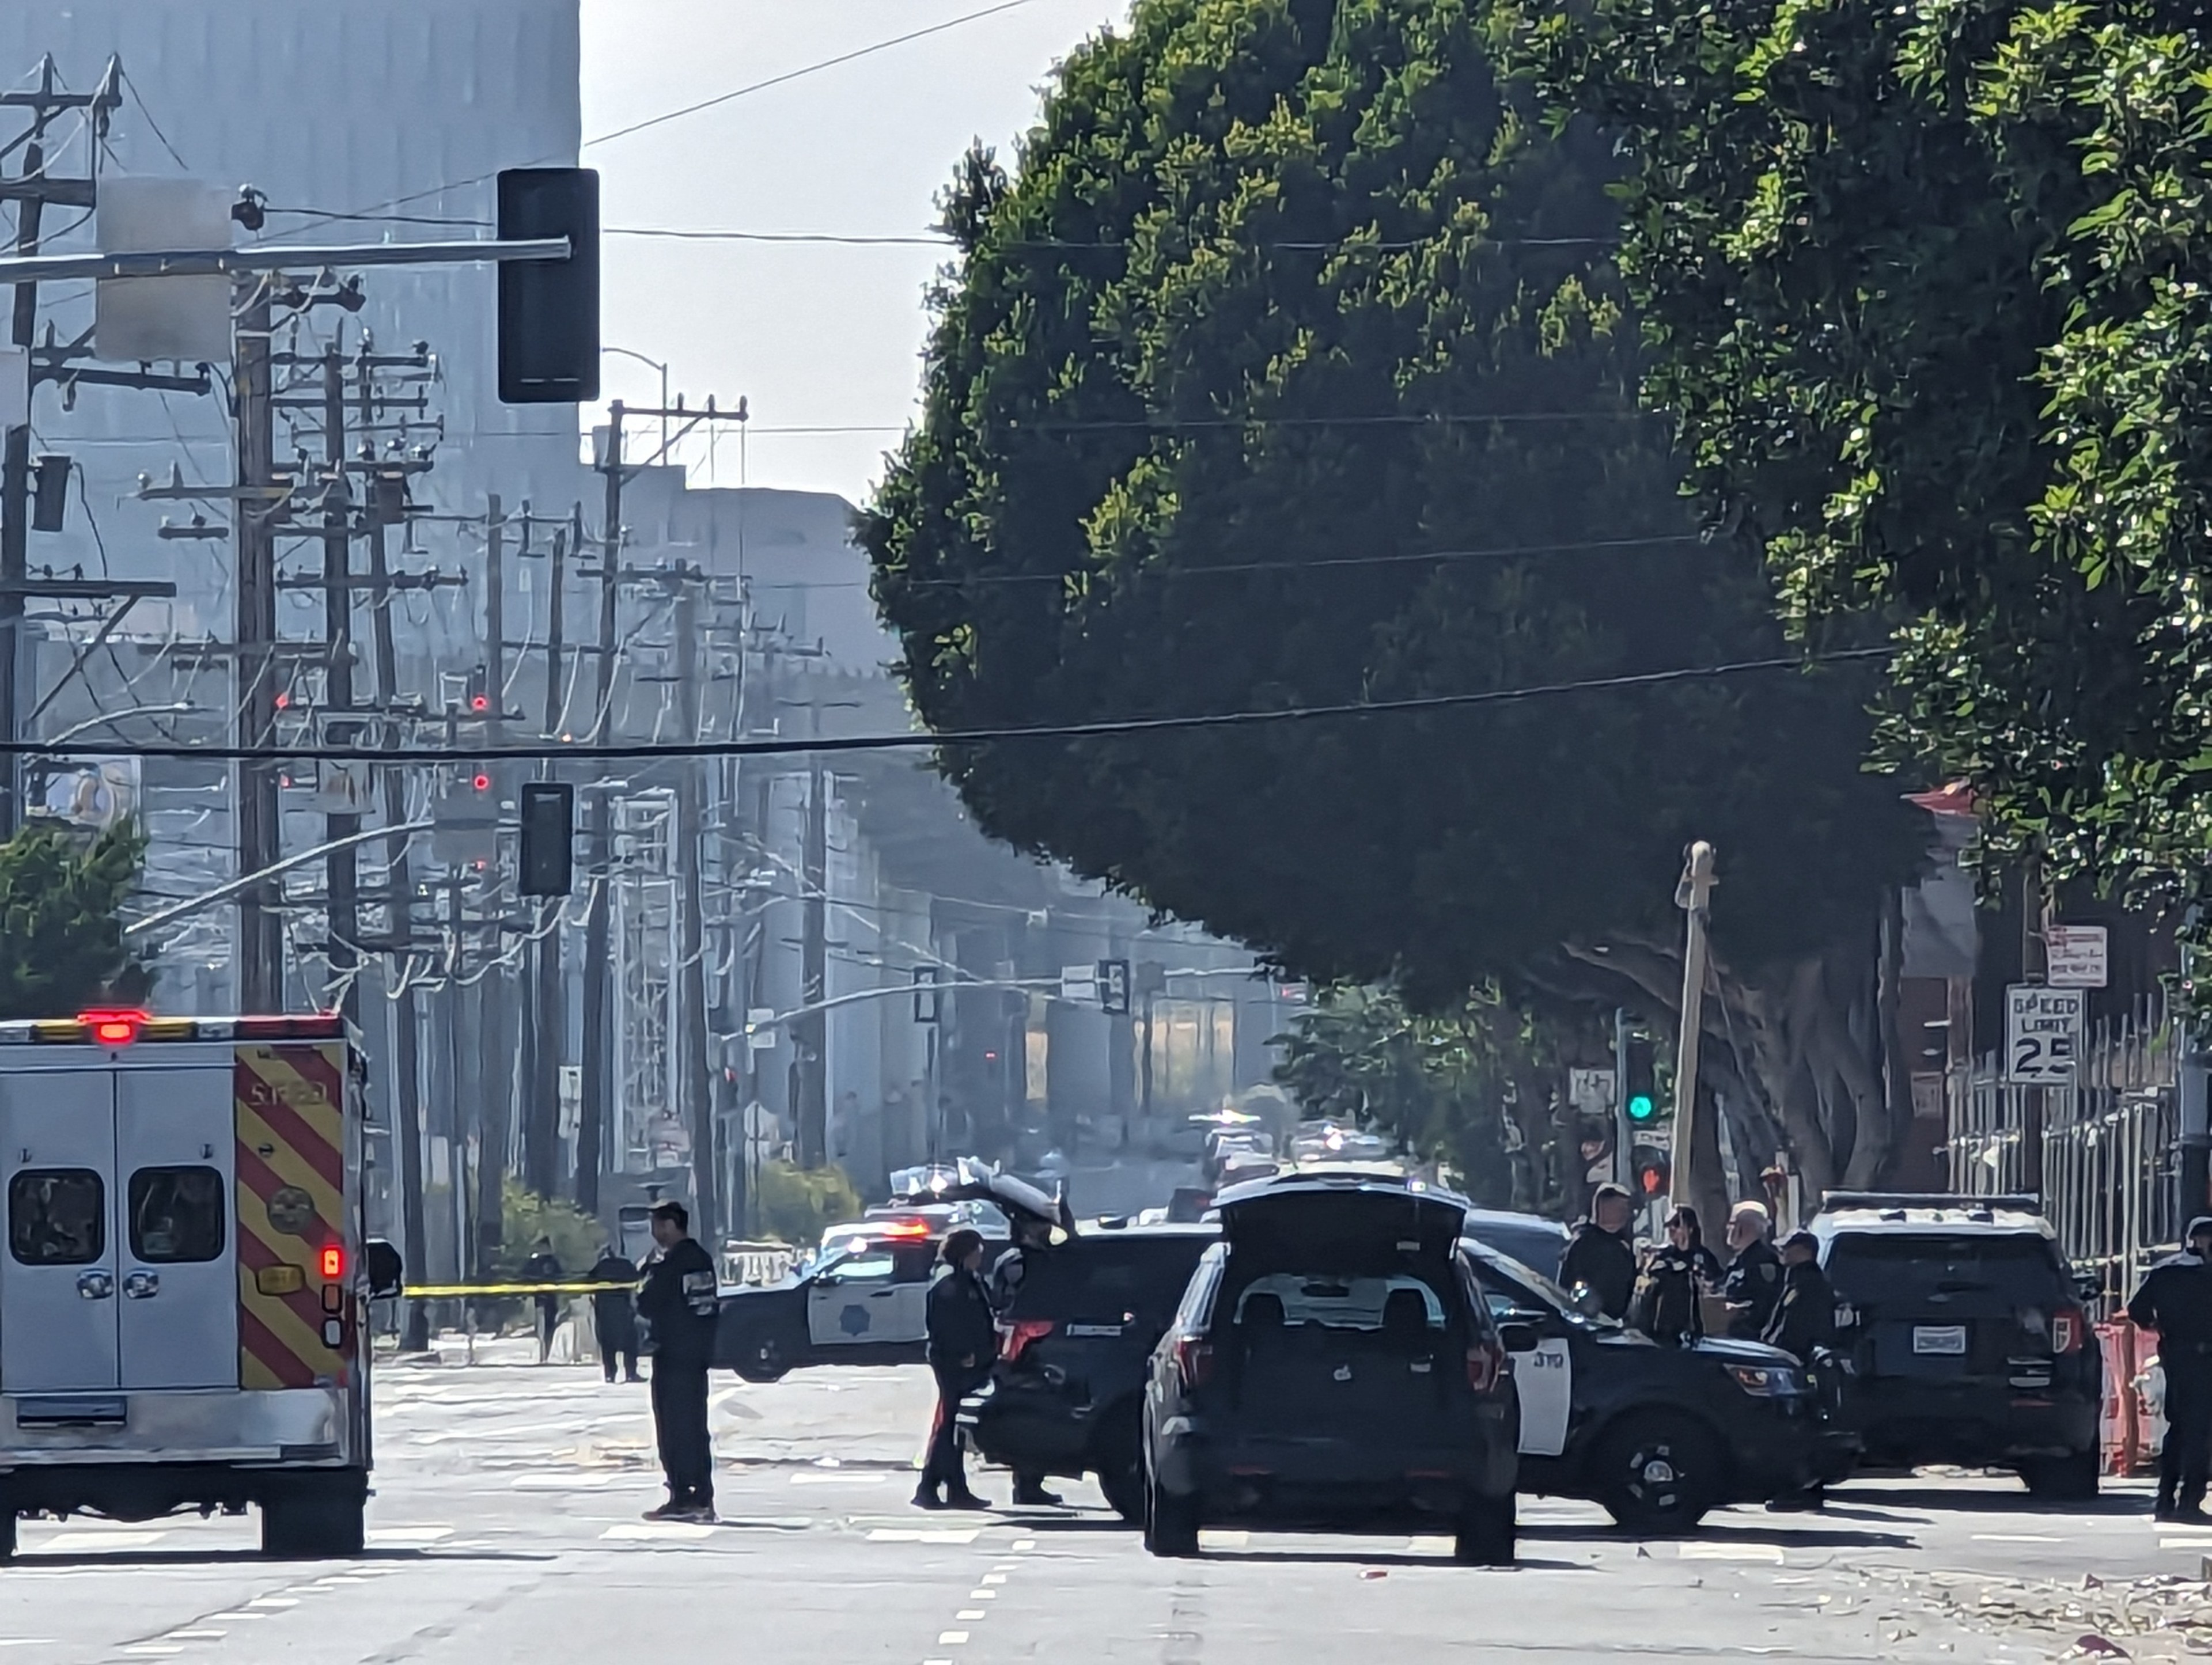 Gunman Surrenders After Standoff With San Francisco Police